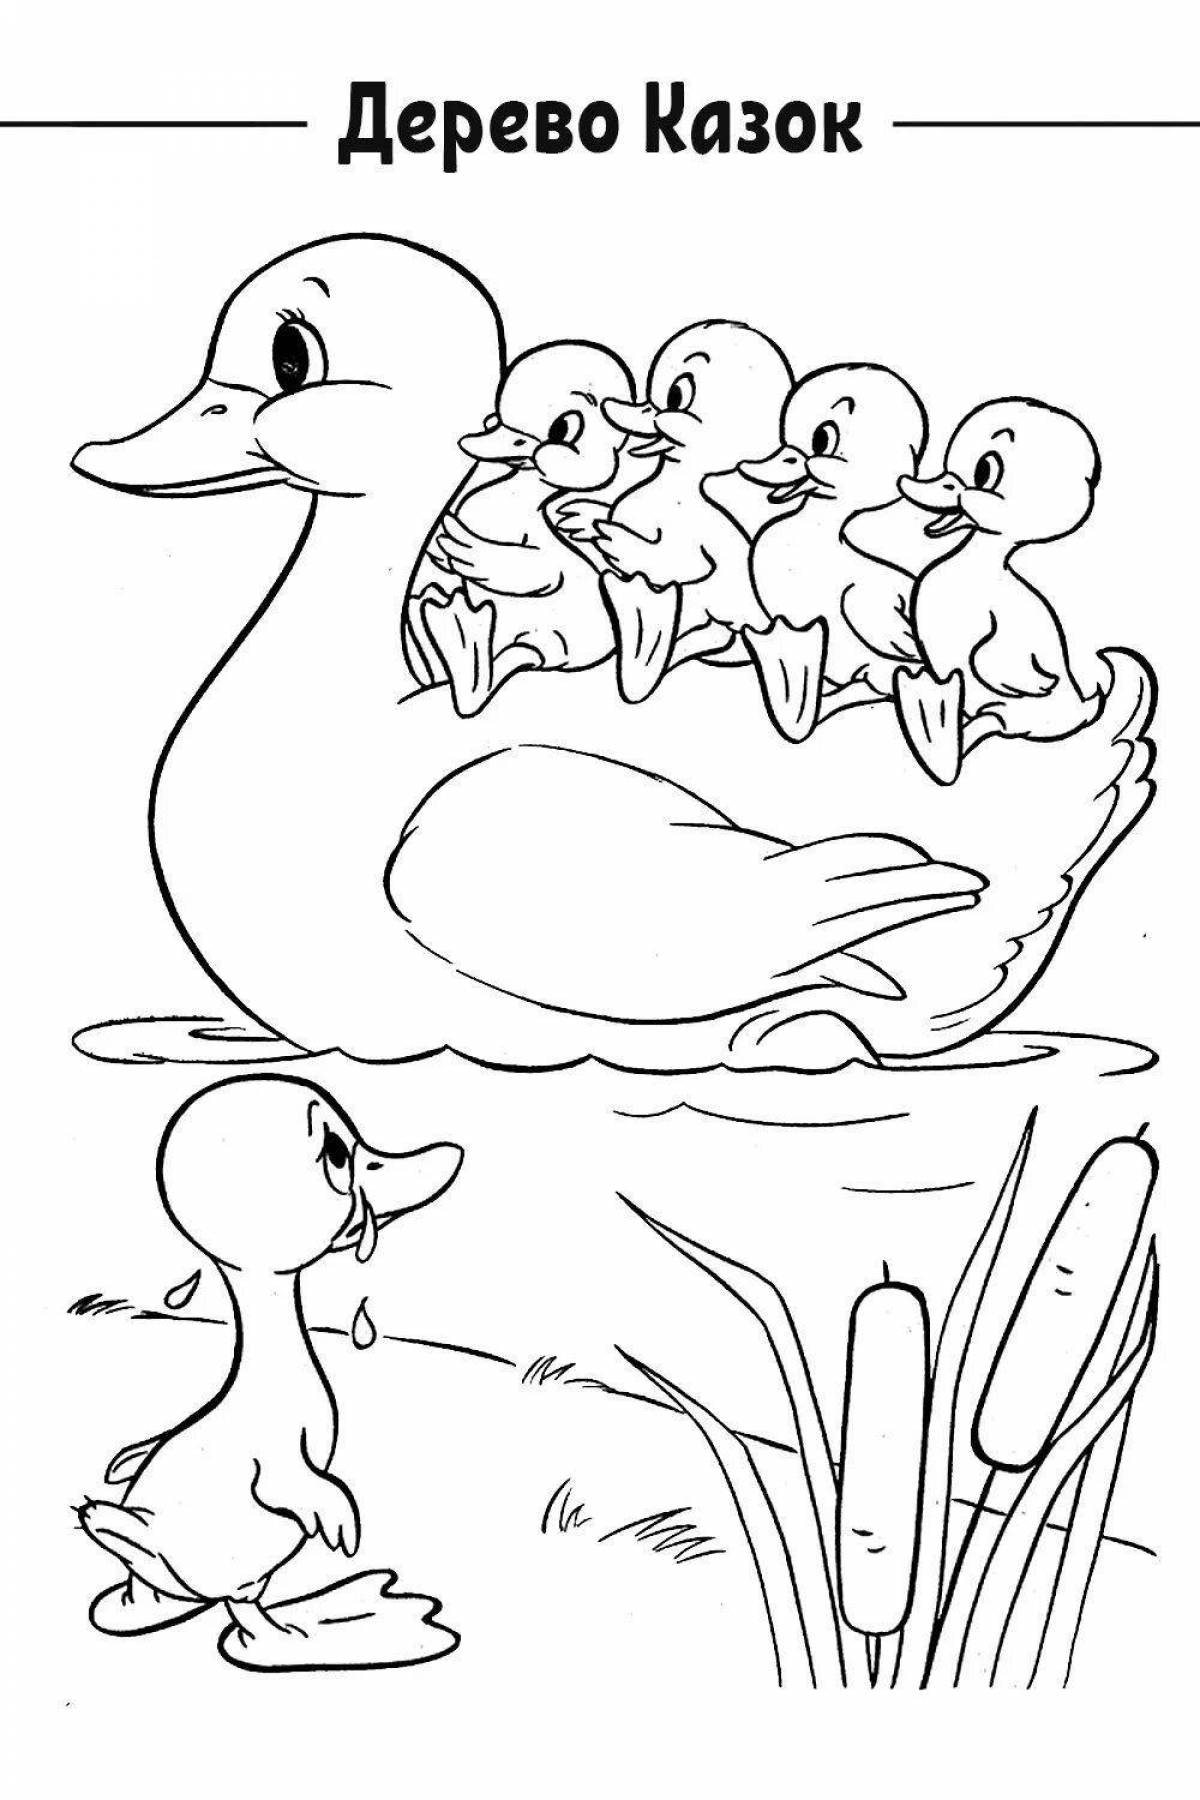 Great ugly duckling coloring book for kids